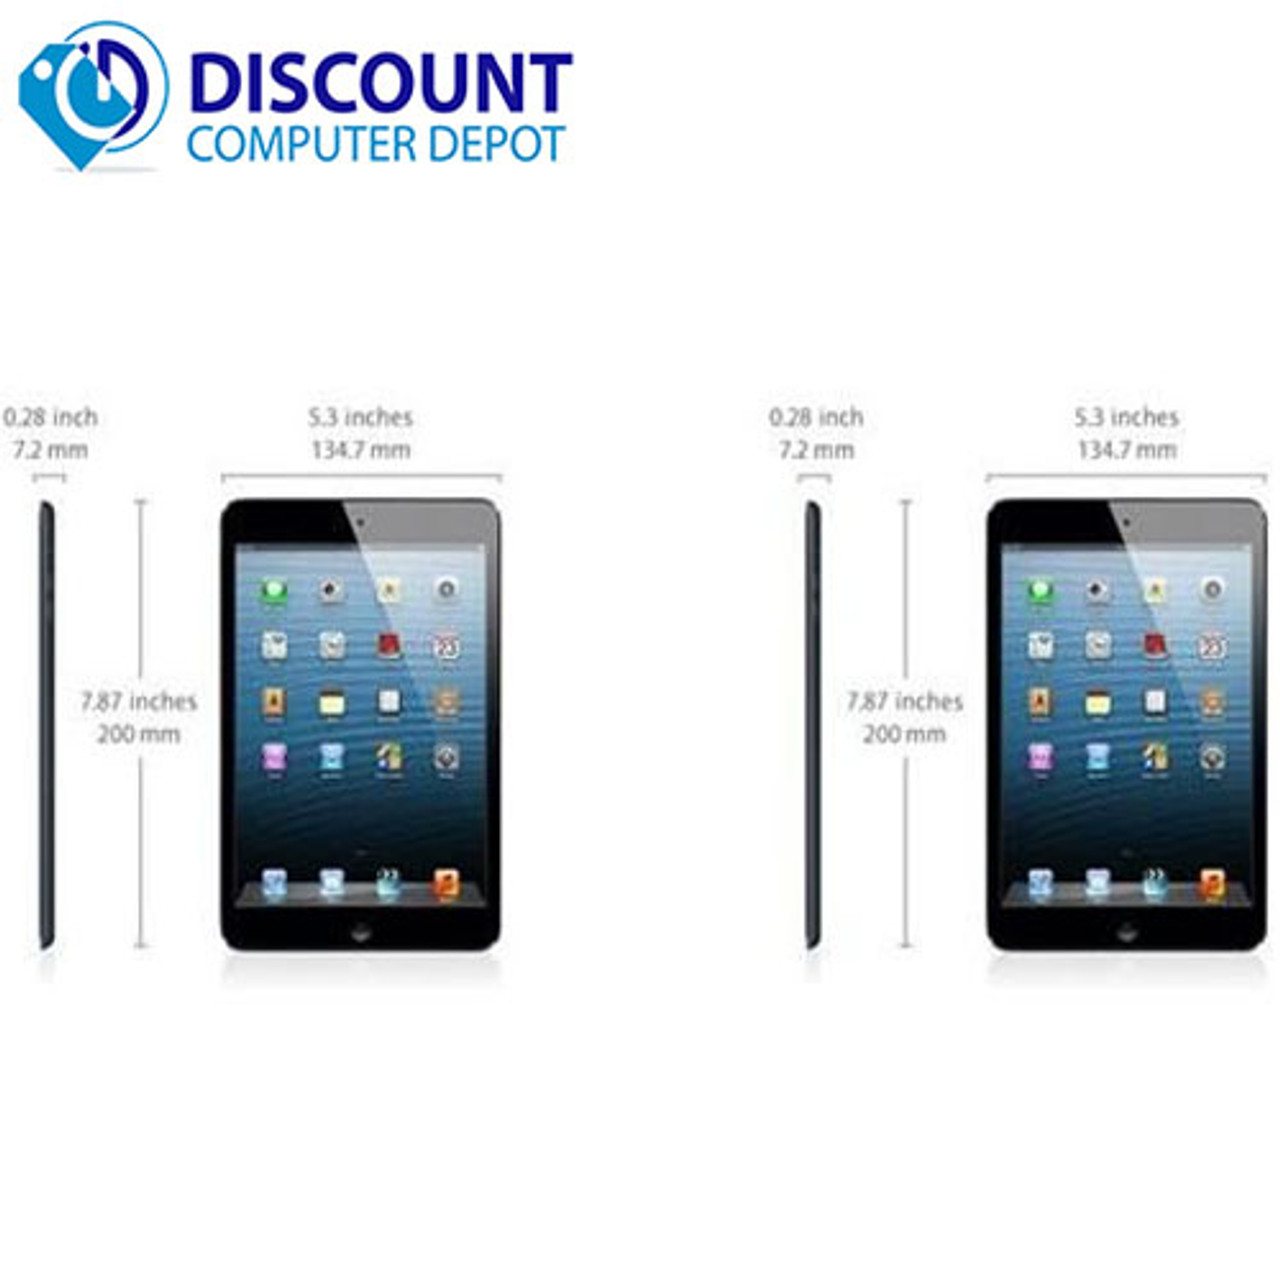 How Big Is the iPad Mini and How Much Does It Weigh?